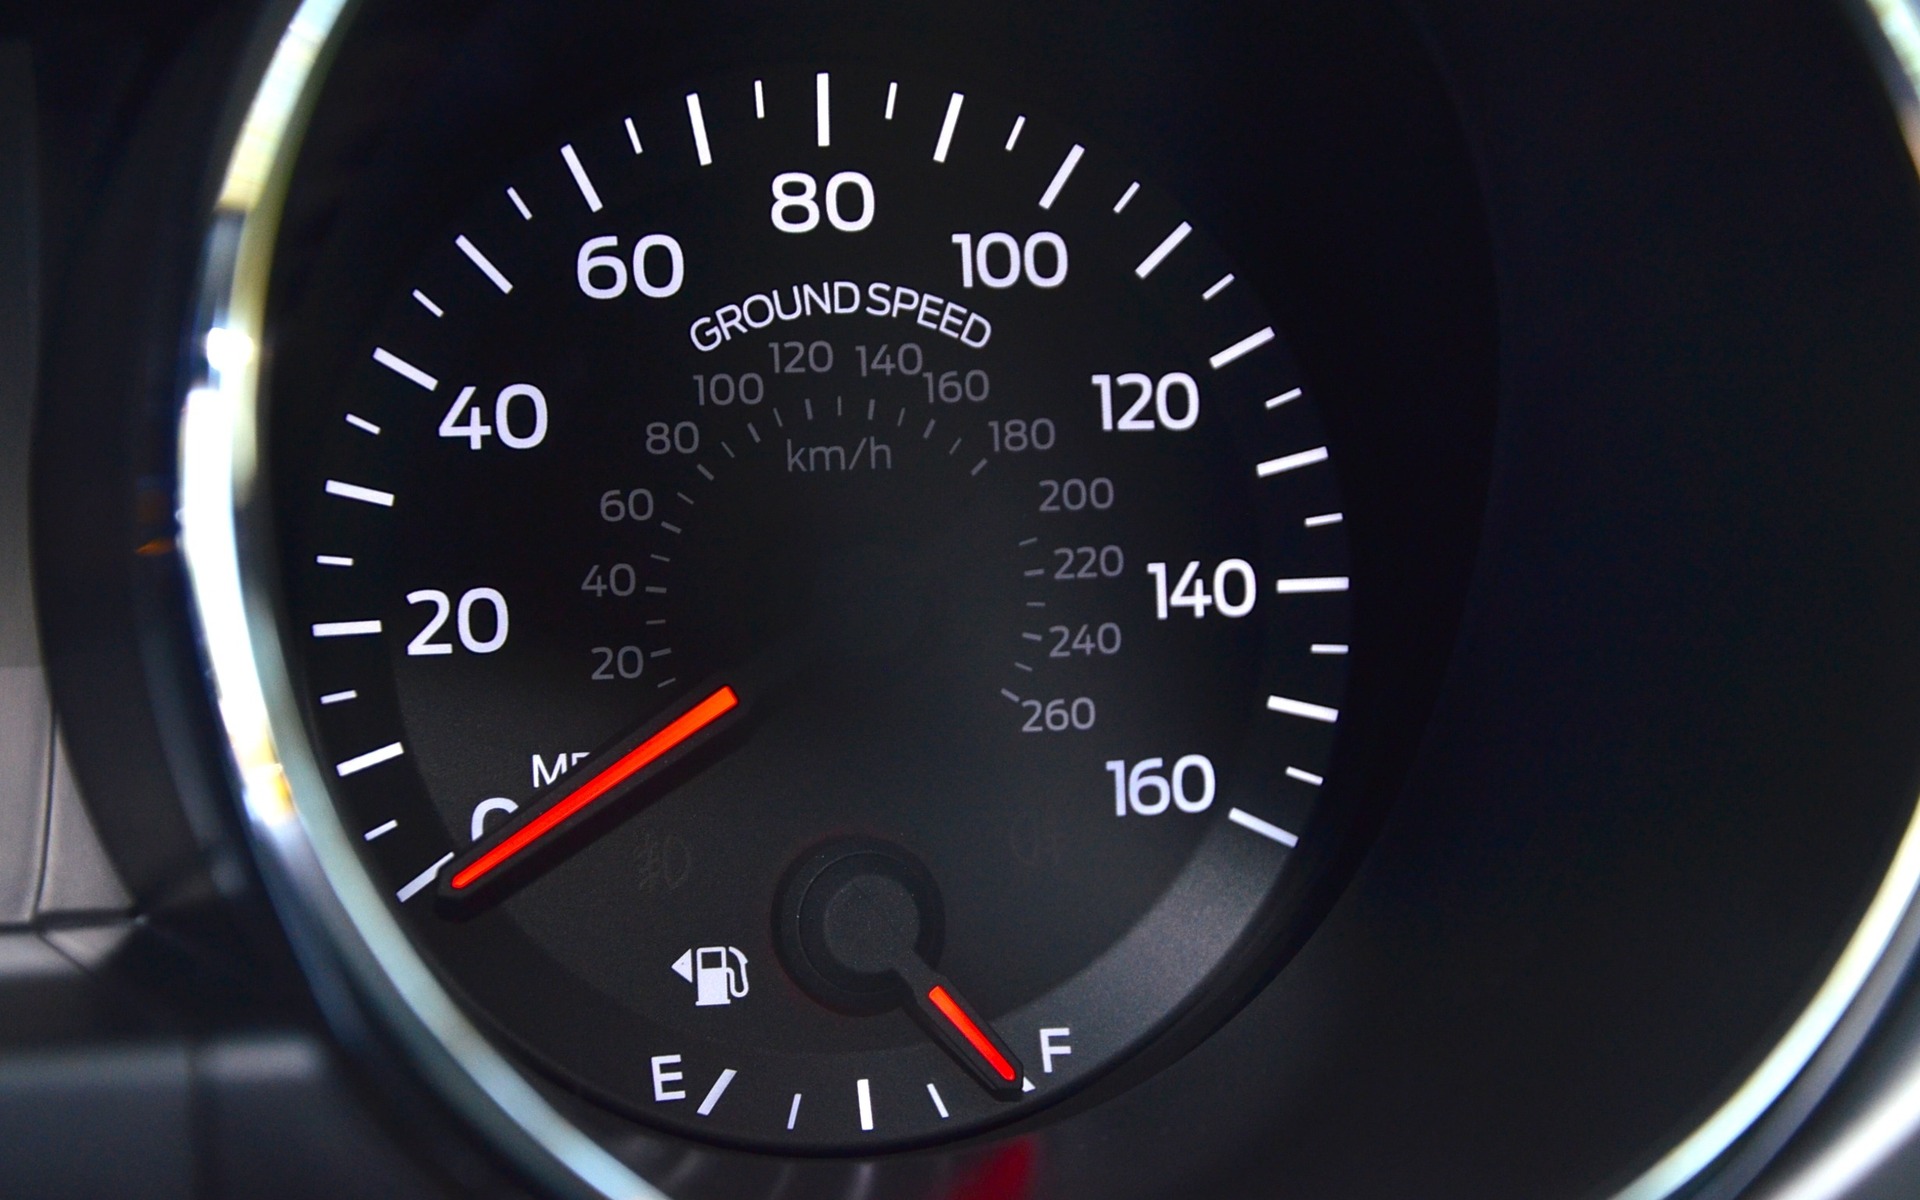 2015 Ford Mustang Coupe - "Ground Speed" speedometer